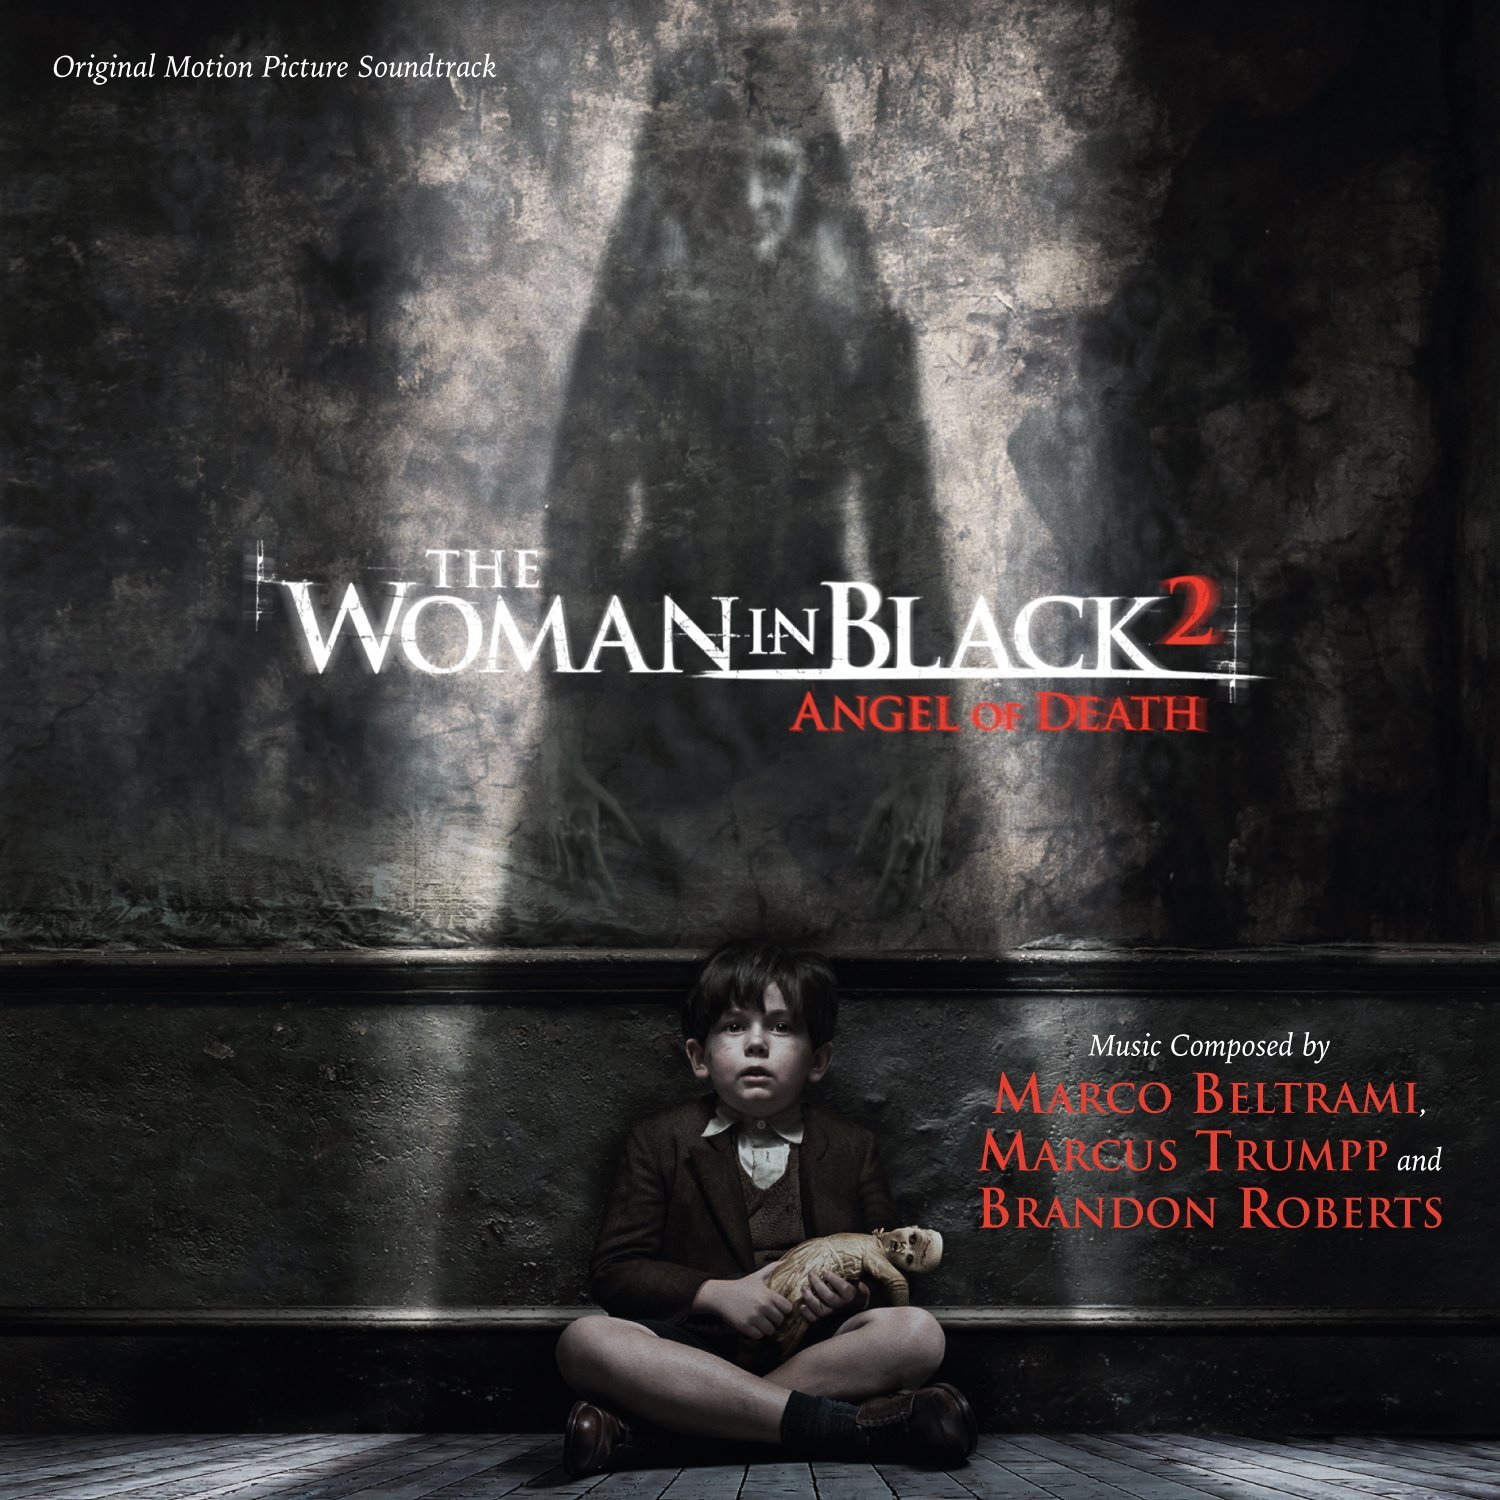 The Woman in Black 2 Angel of Death Soundtrack Available Today ...